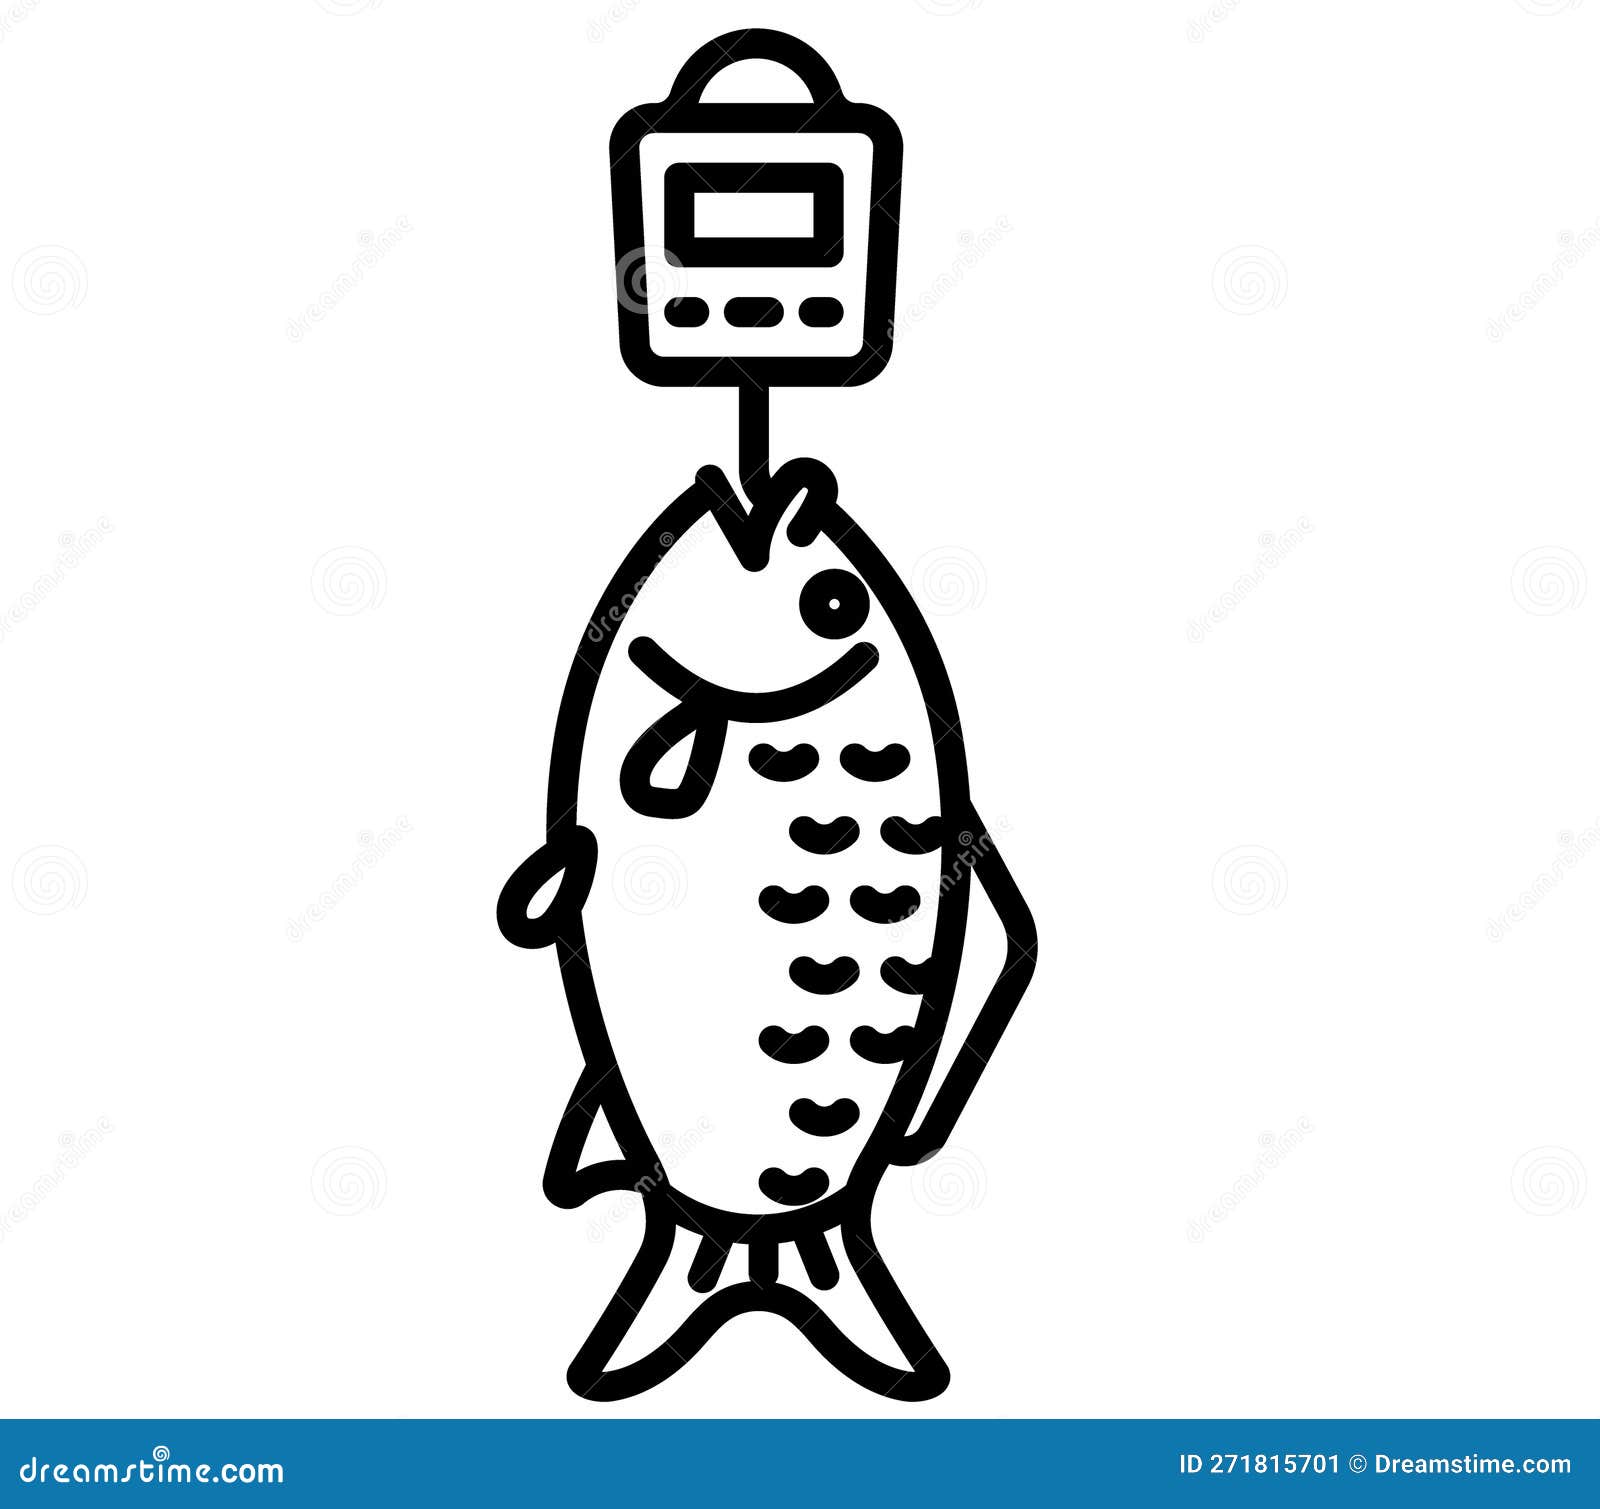 Illustration of Portable Fish Scale for Fish Weighting. Stock